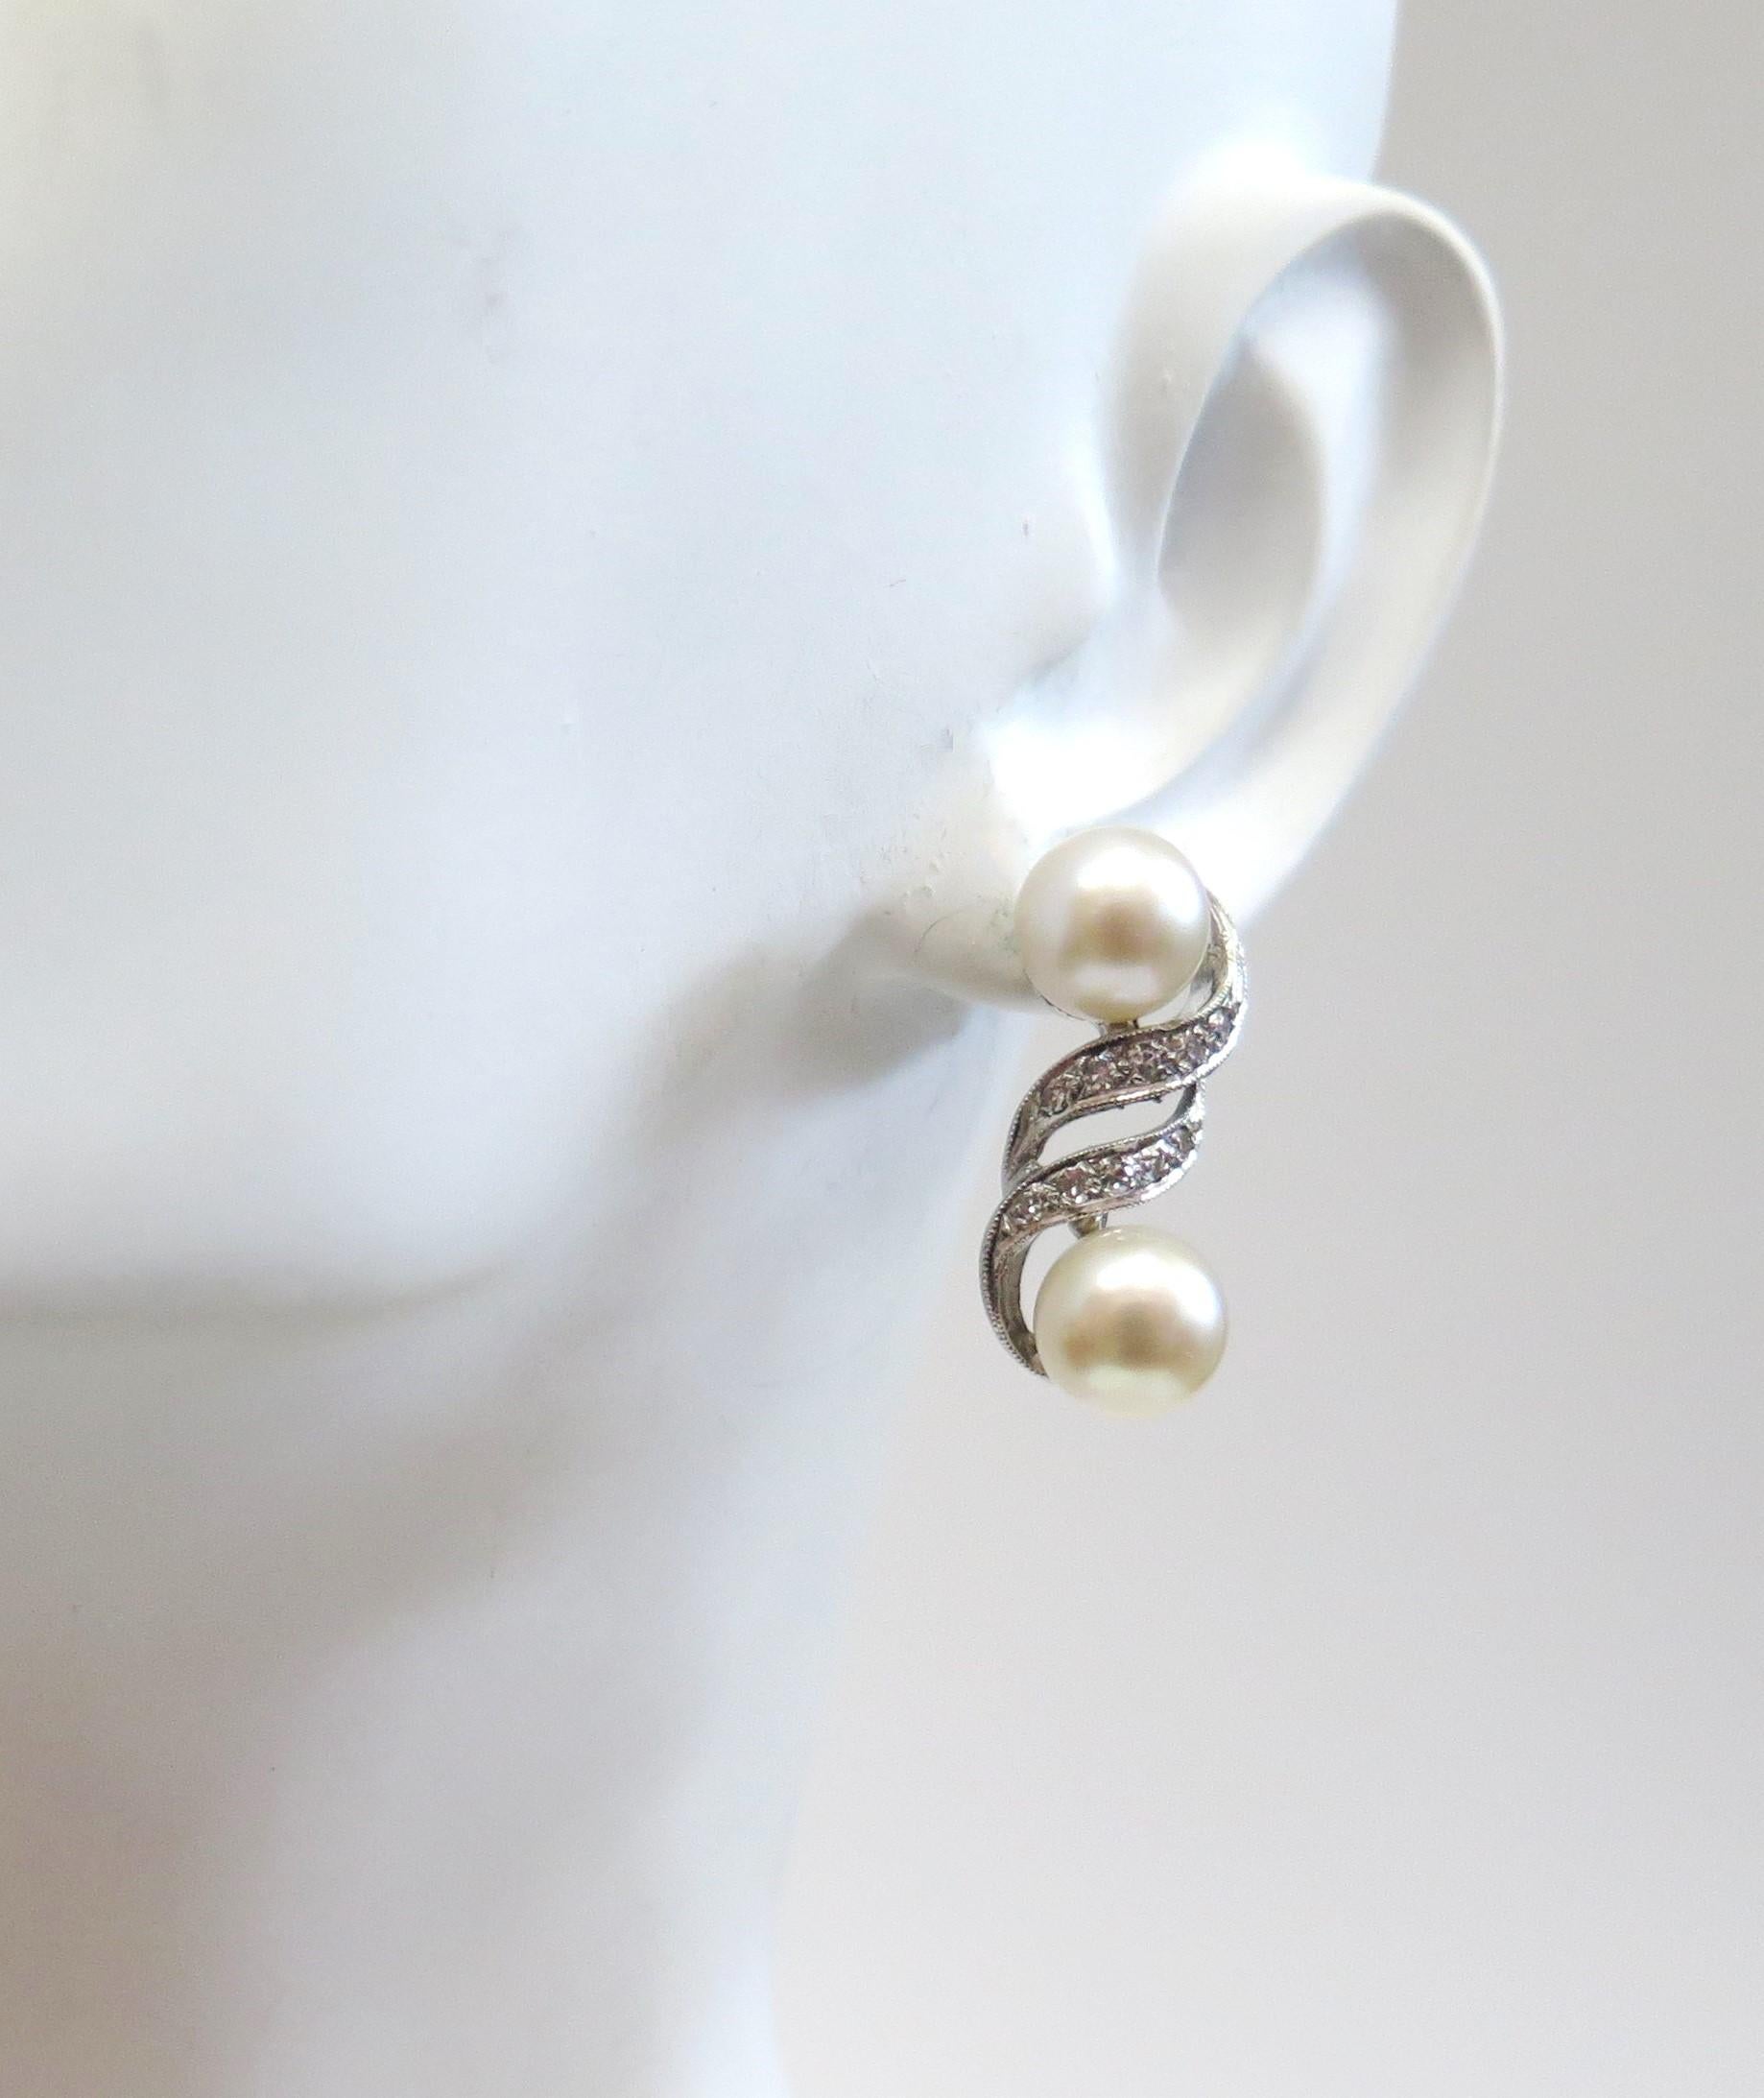 Women's Vintage 1950s Double Pearl Cultured Earrings with Diamonds / 14 Karat White Gold